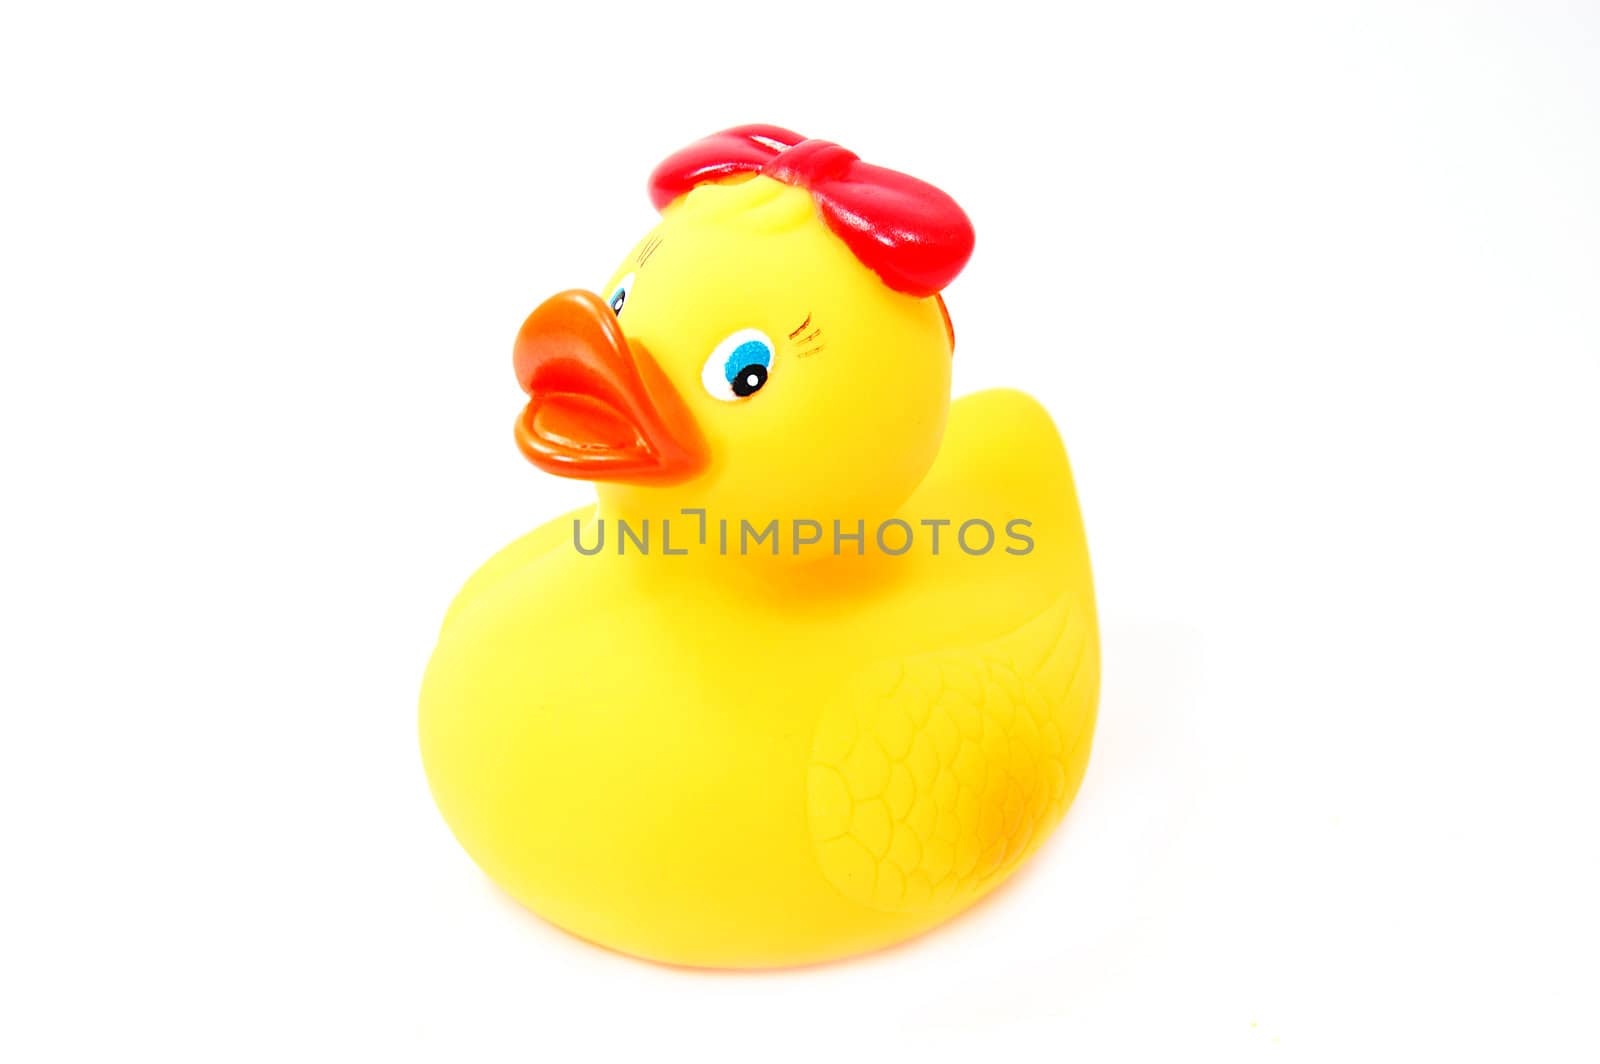 Rubber duck by Angel_a